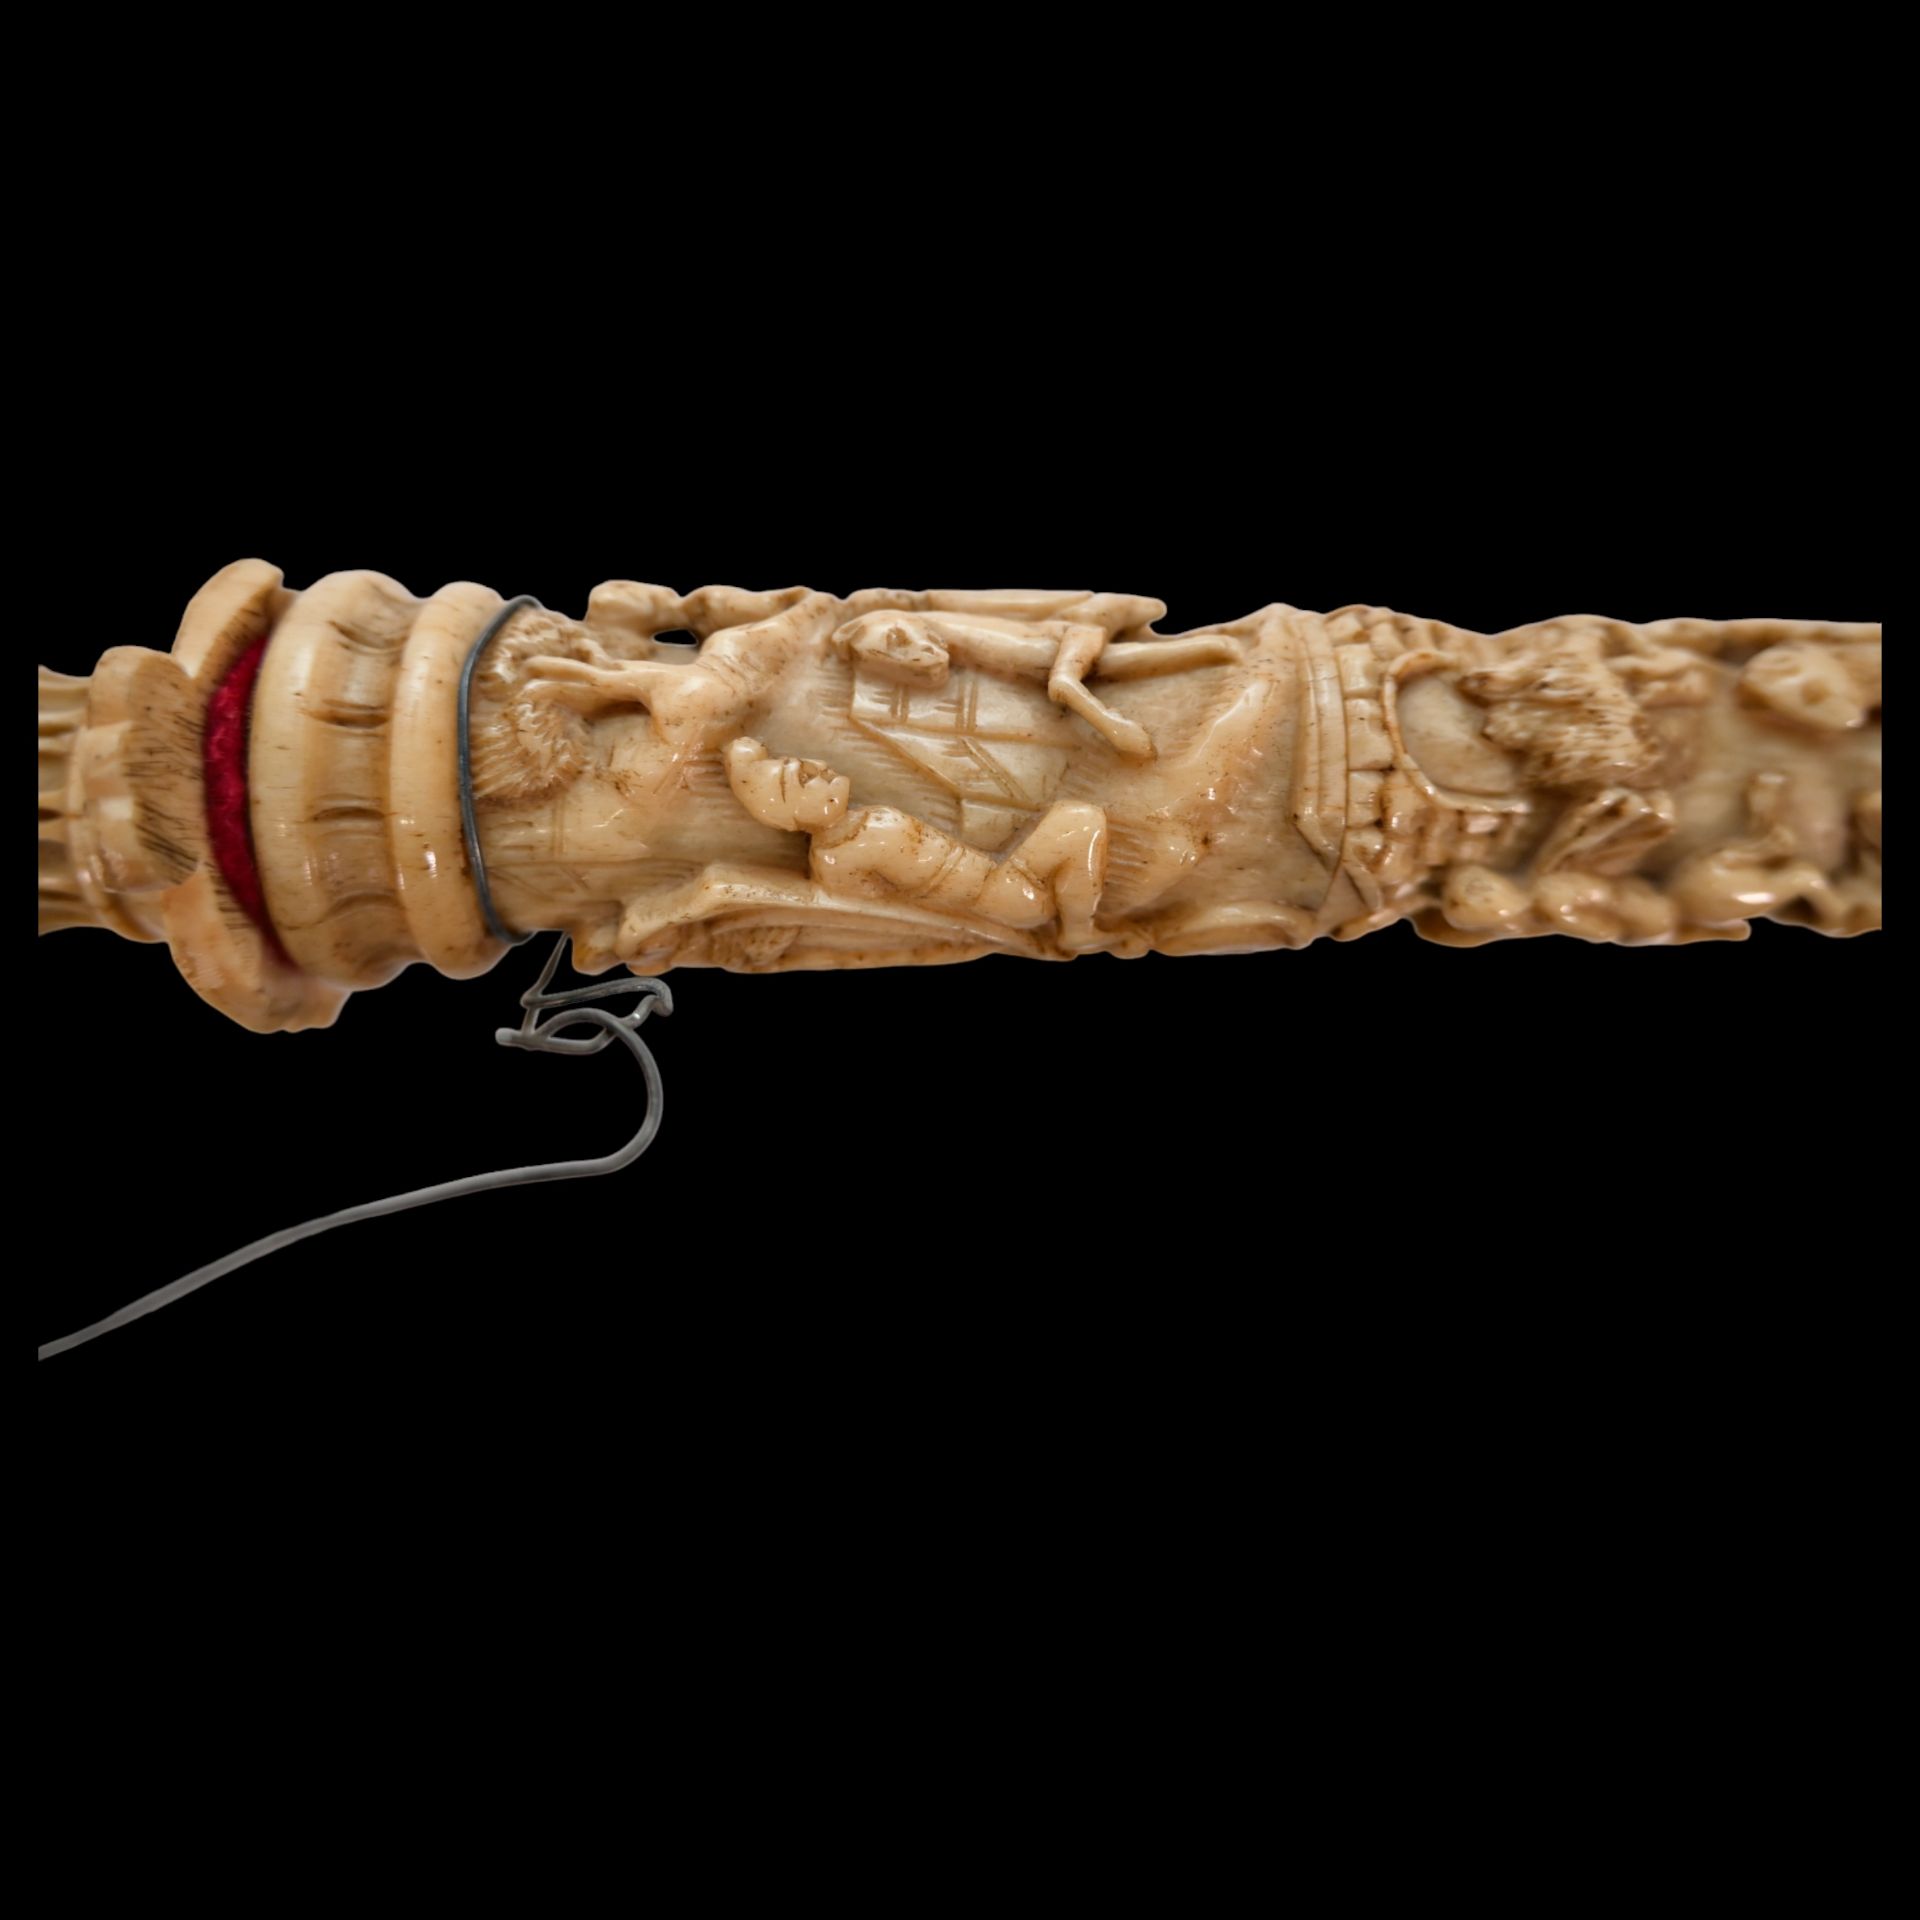 A Rare French nobleman's dagger, hilt and scabbard carved from bone, 19th century. - Image 10 of 18